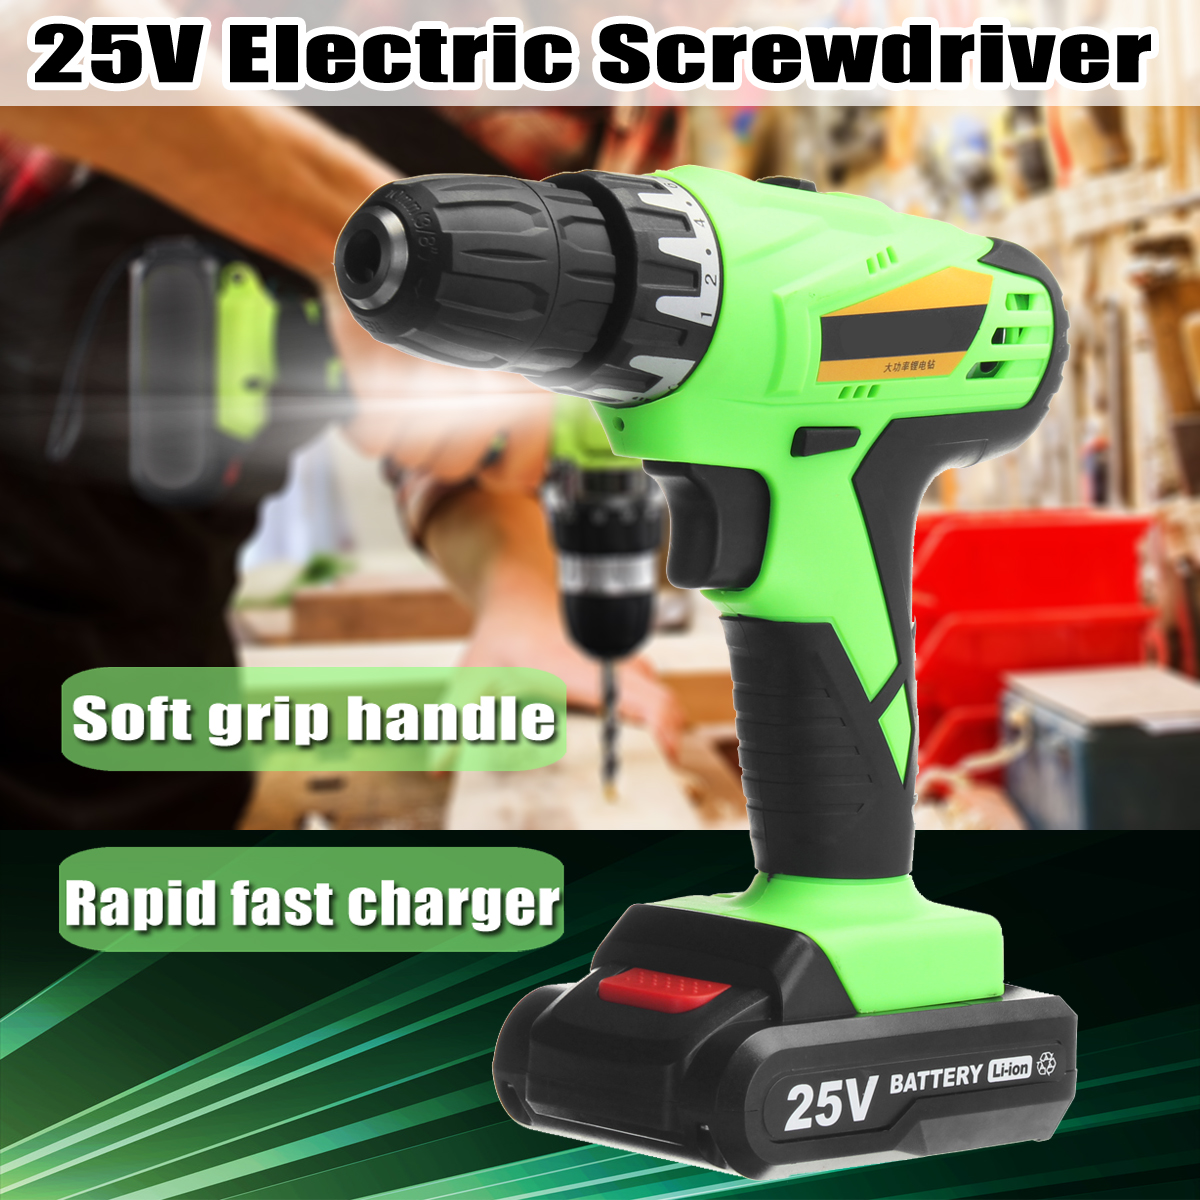 25V-Cordless-Power-Drill-2-Lithium-Ion-Battery-Rechargeable-Electric-Screwdriver-Kit-1275028-1